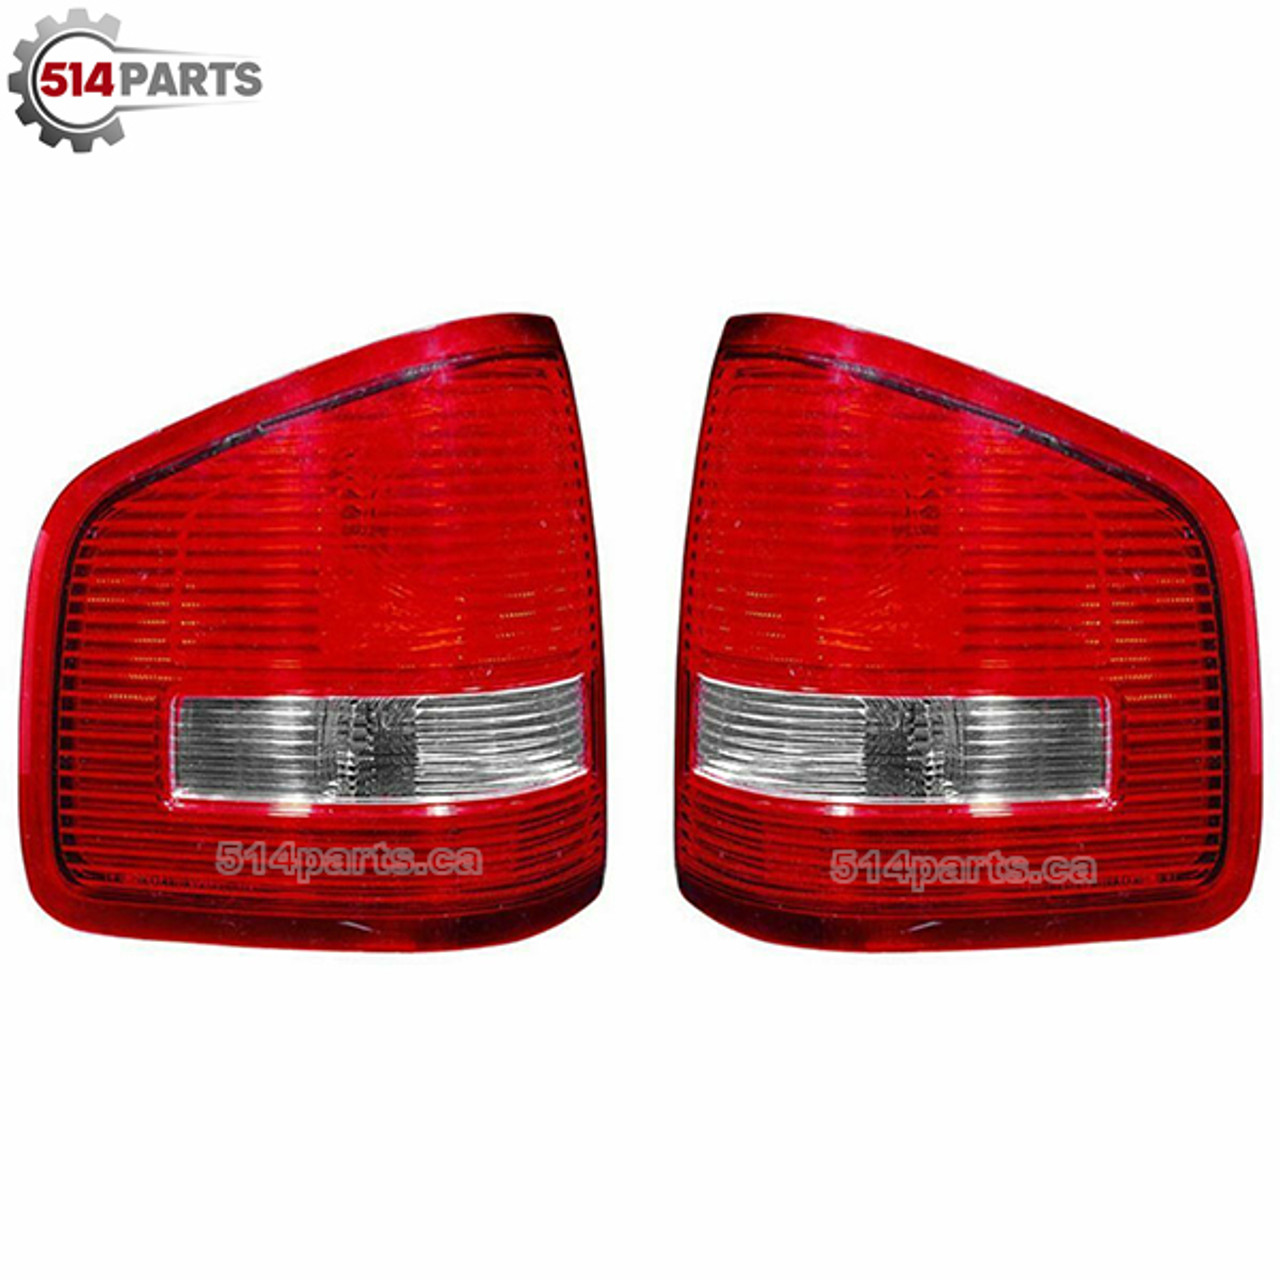 2007 - 2010 FORD EXPLORER SPORT TRAC TAIL LIGHTS High Quality - PHARES ARRIERE Haute Qualite